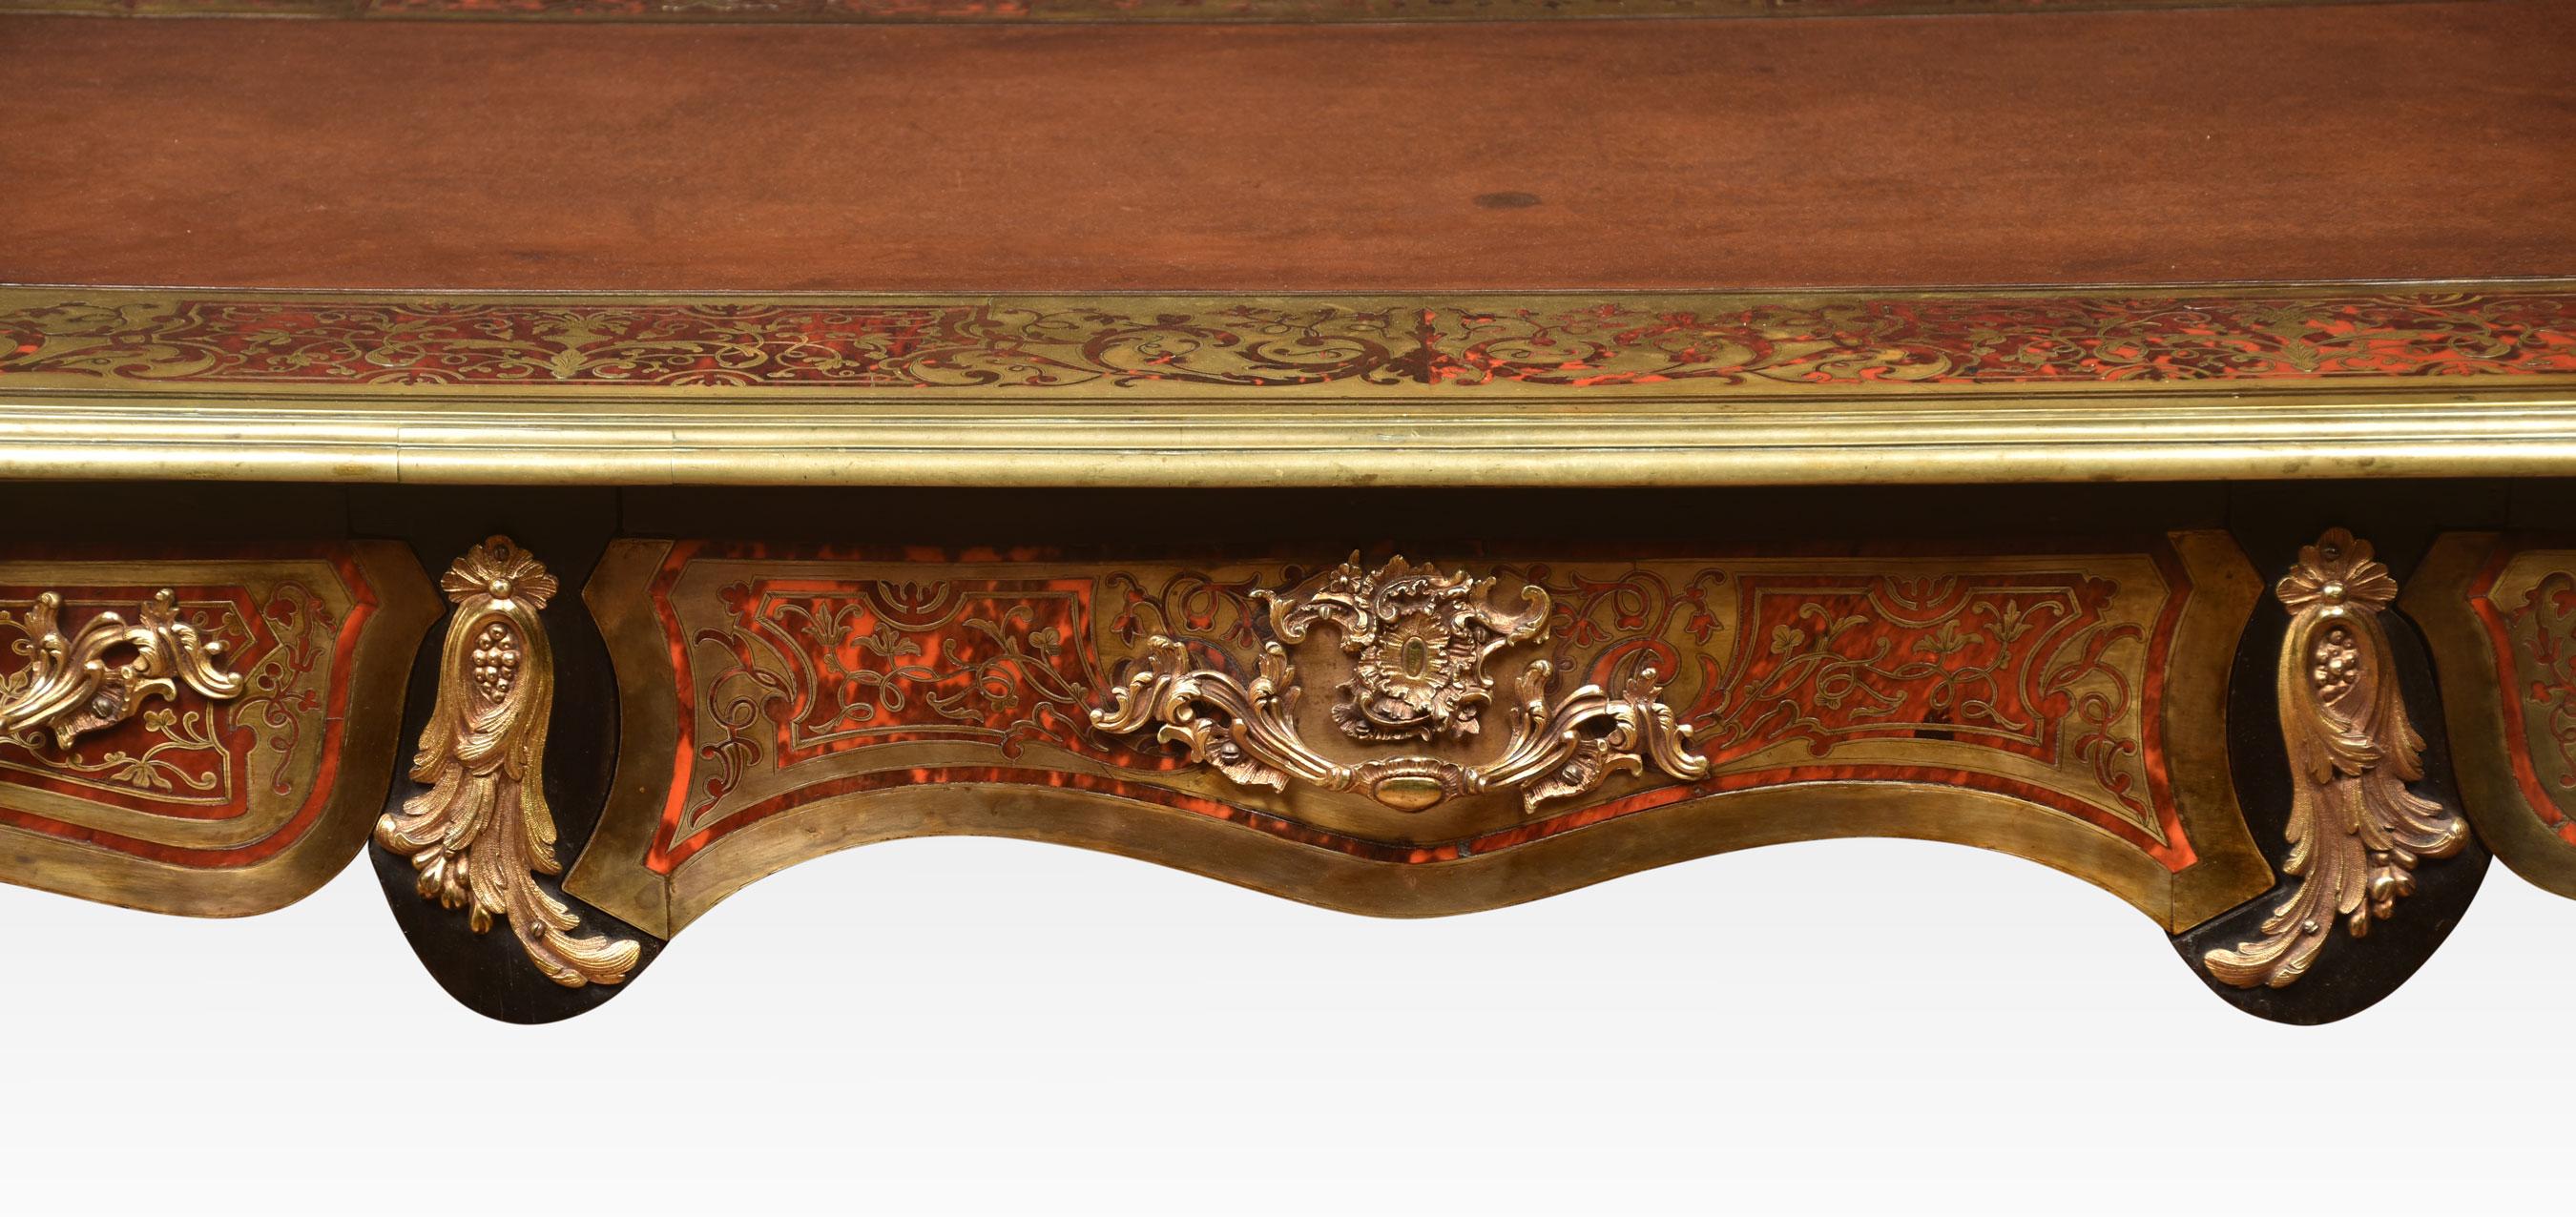 French Boulle Work Bureau Plat For Sale